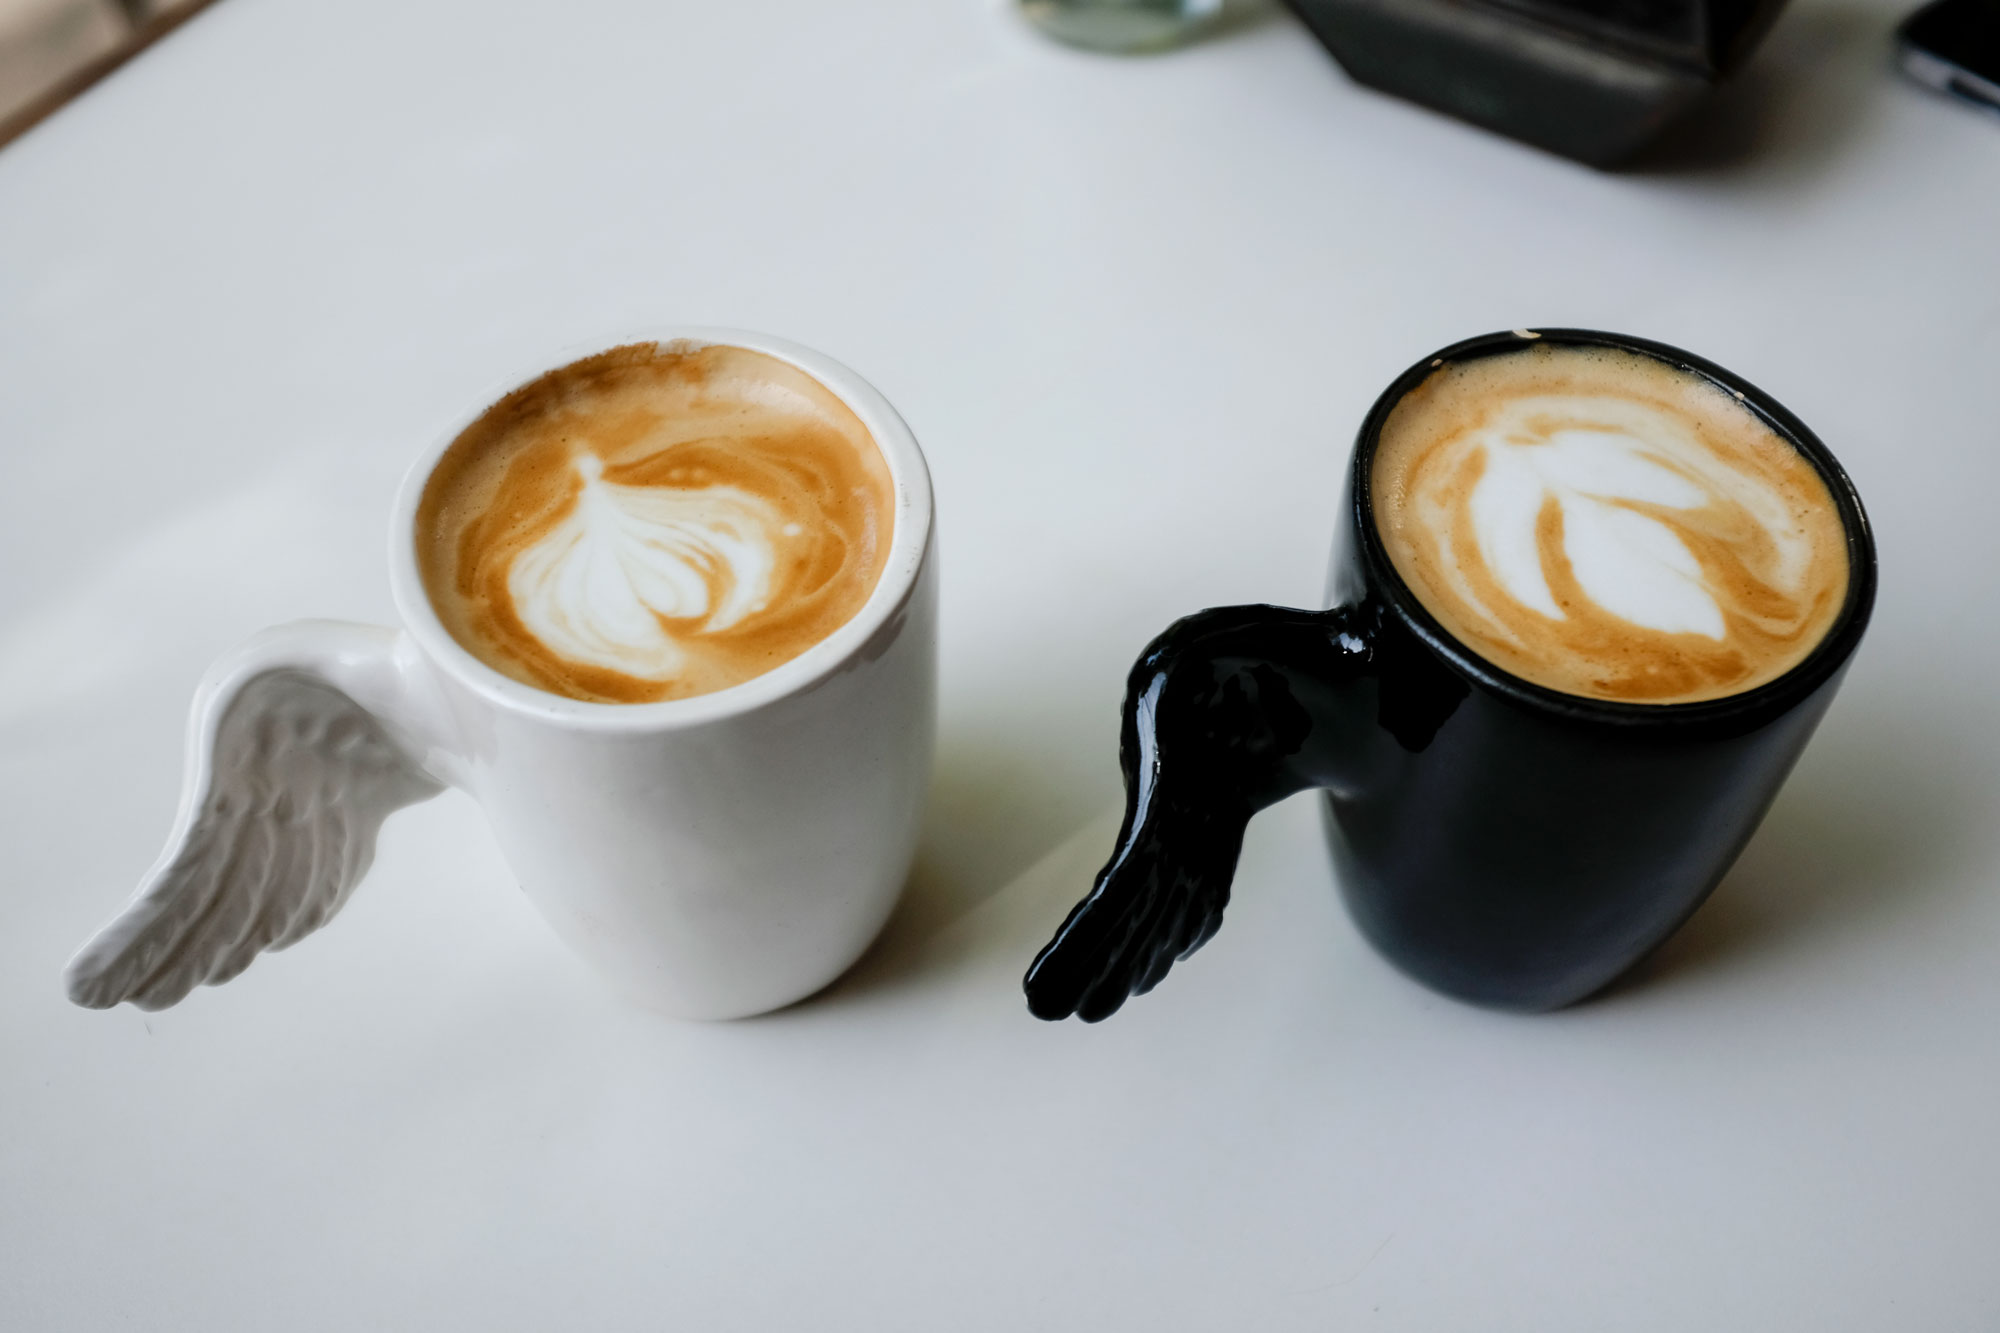 Two cappuccinos in mugs with angel wing shaped handles